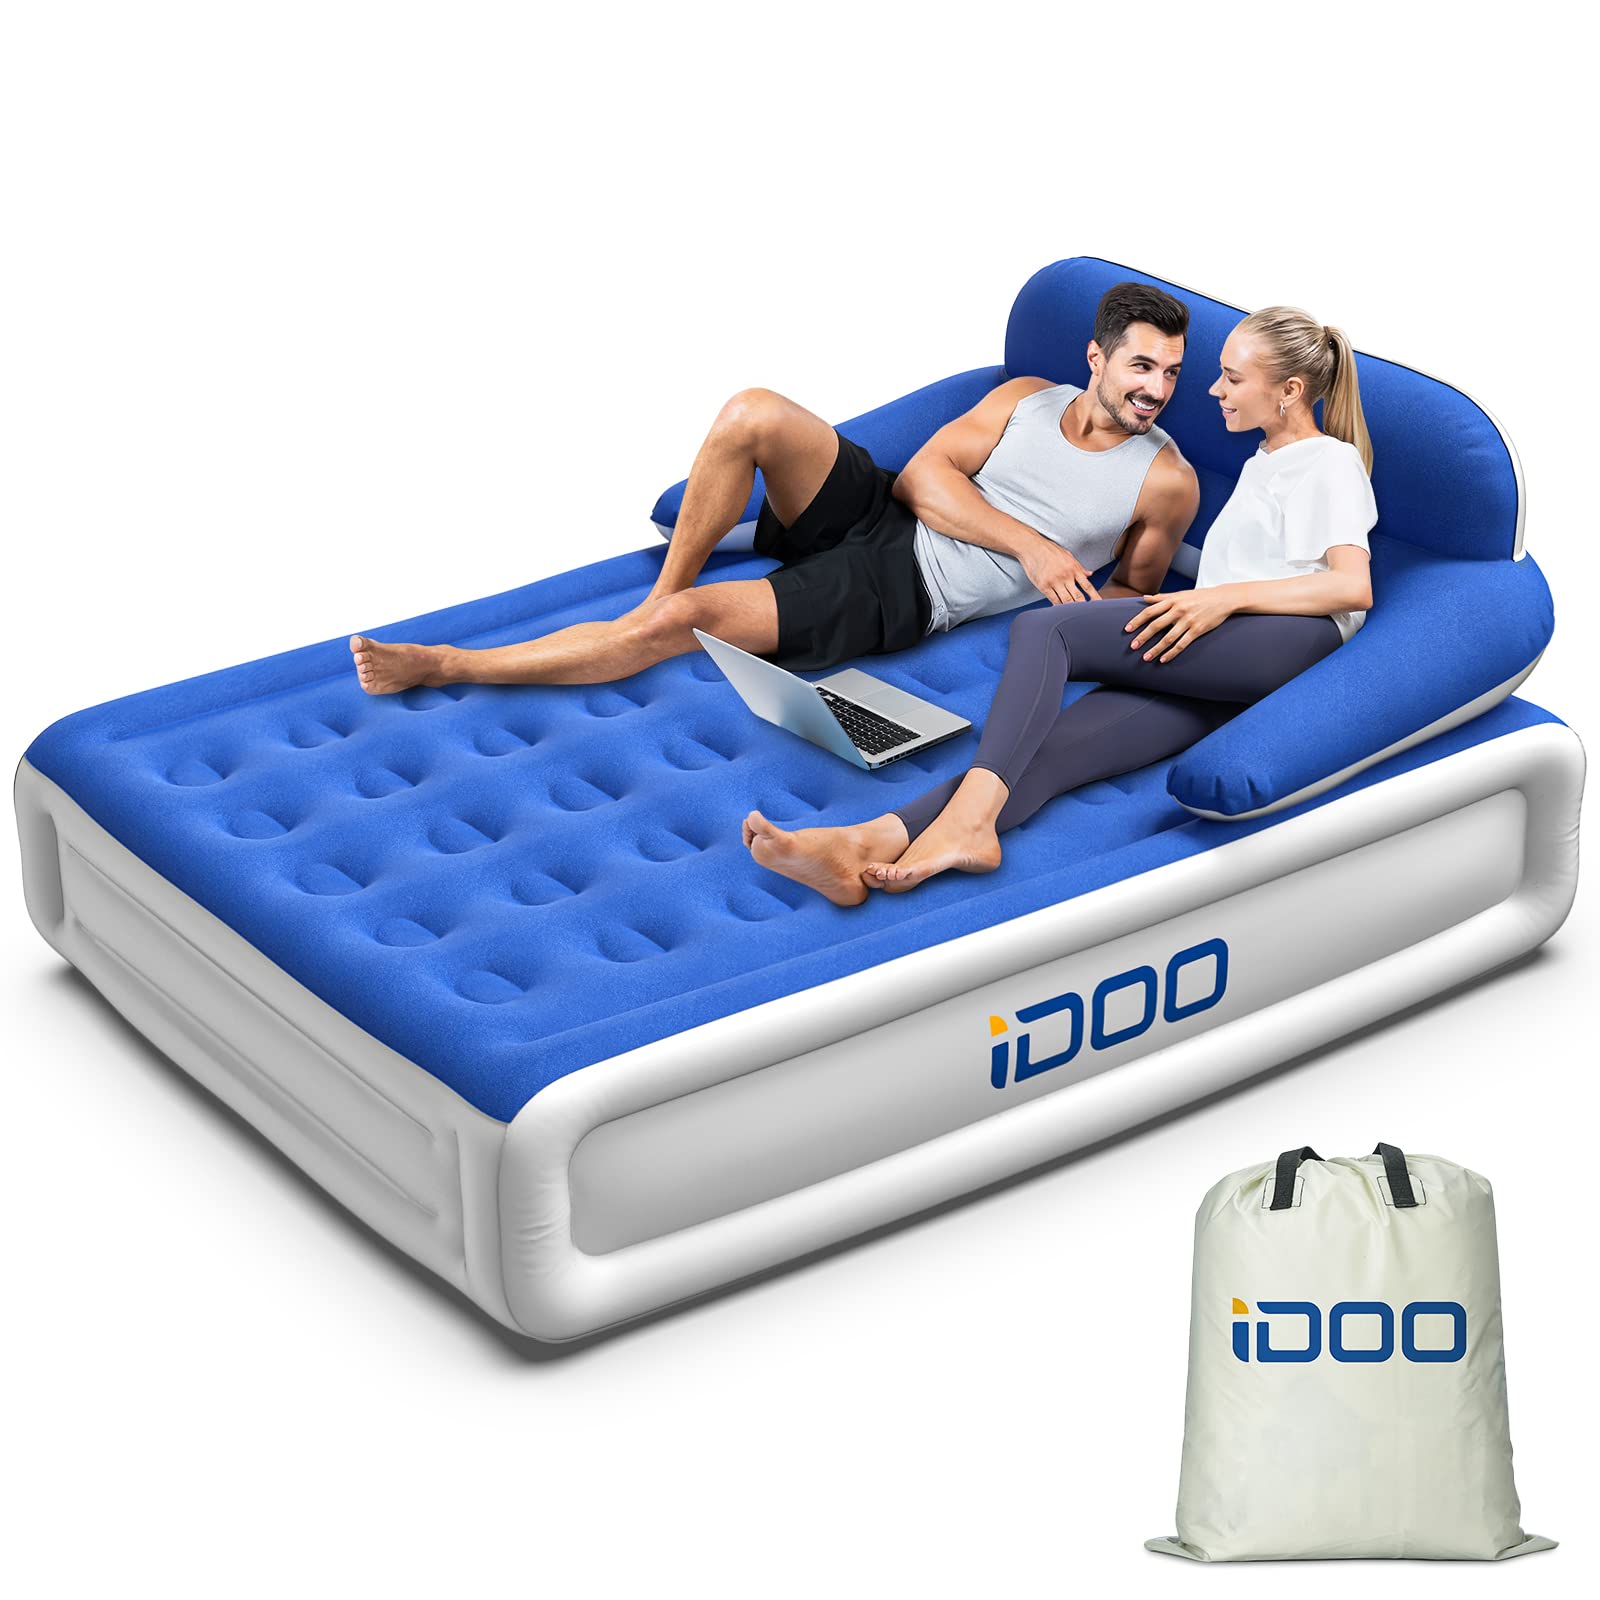 iDOO Air Bed with Headboard, King Size Inflatable Mattress with Built-in Pump, Camping Air Beds Backrest for Outdoors, Double Airbed for Adult Sleeping Bedroom, Portable Fast Inflatable Deflatable